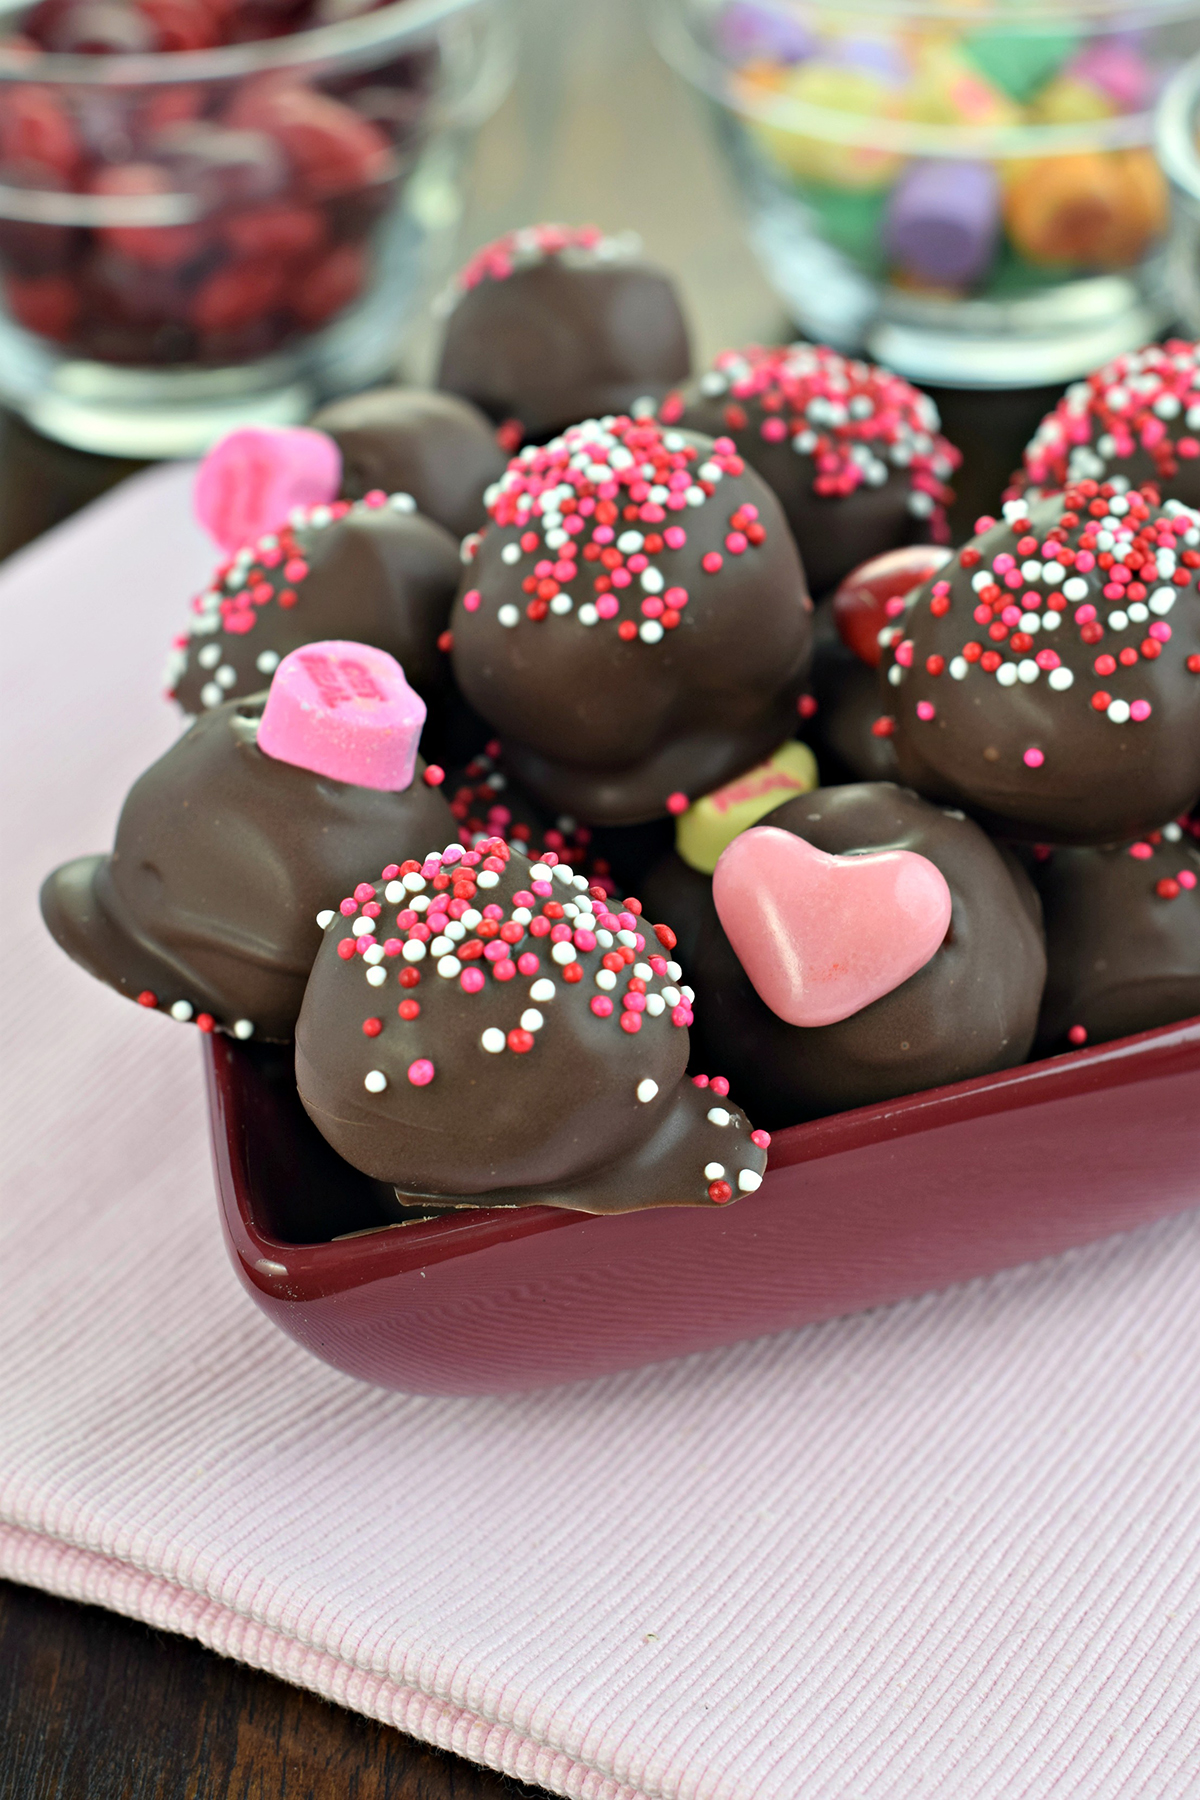 Chocolate Covered Cherry Truffles to Win Valentine's Day Forever | HuffPost